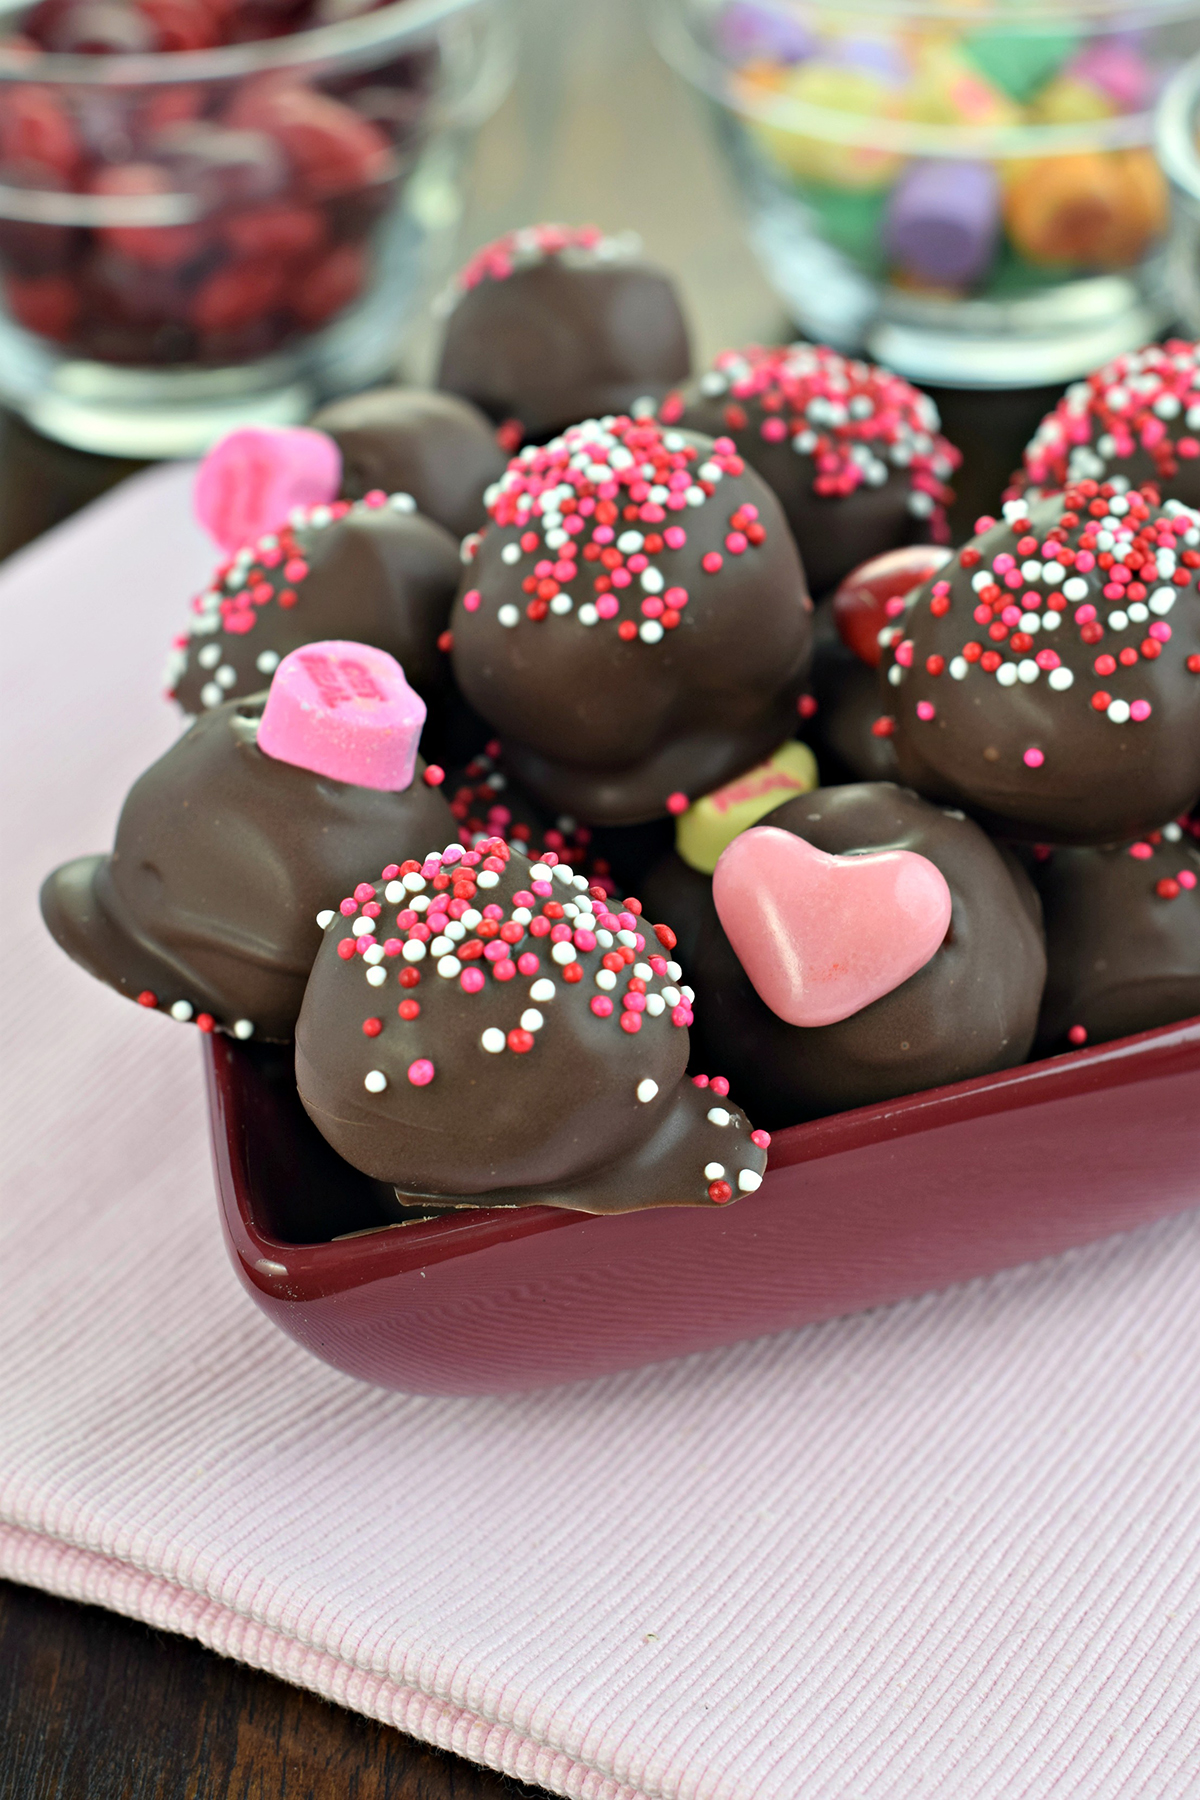 Chocolate Covered Cherry Truffles to Win Valentine's Day Forever | HuffPost